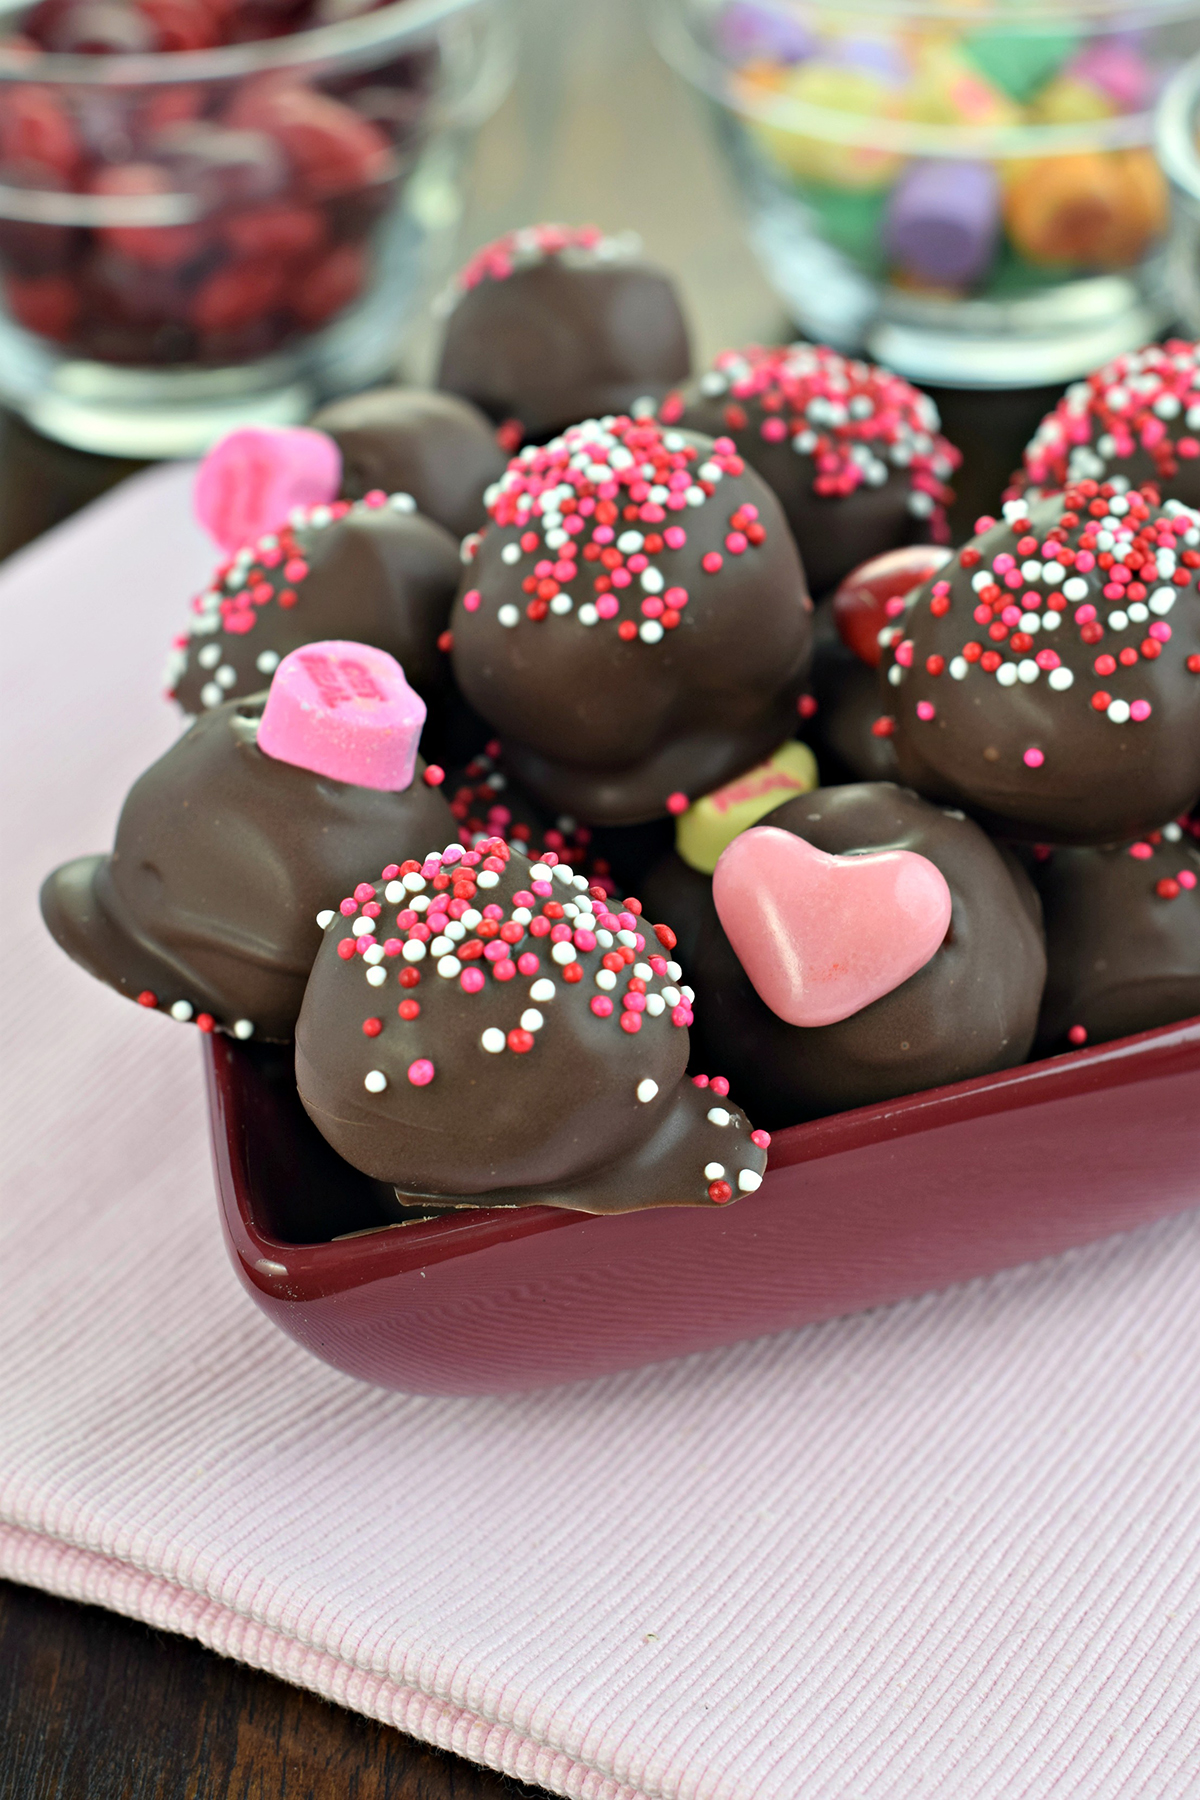 Chocolate Covered Cherry Truffles to Win Valentine's Day Forever | HuffPost